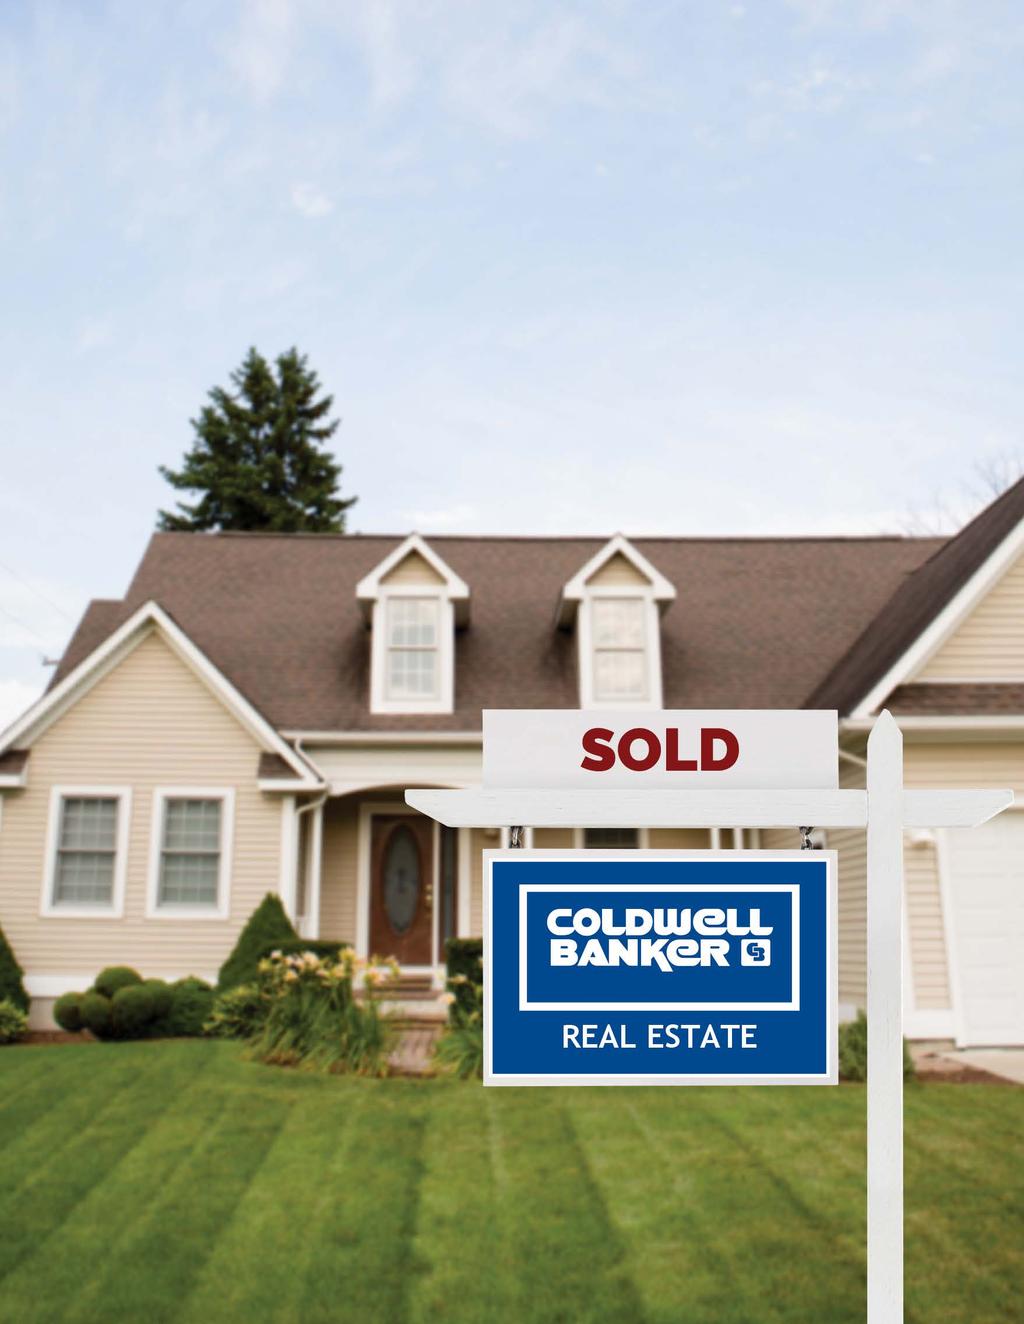 + + + + + + + + + + + + Coldwell Banker The Coldwell Banker Canada network is comprised of experienced brokers who bring their own local expertise to the table as they help you tap into our